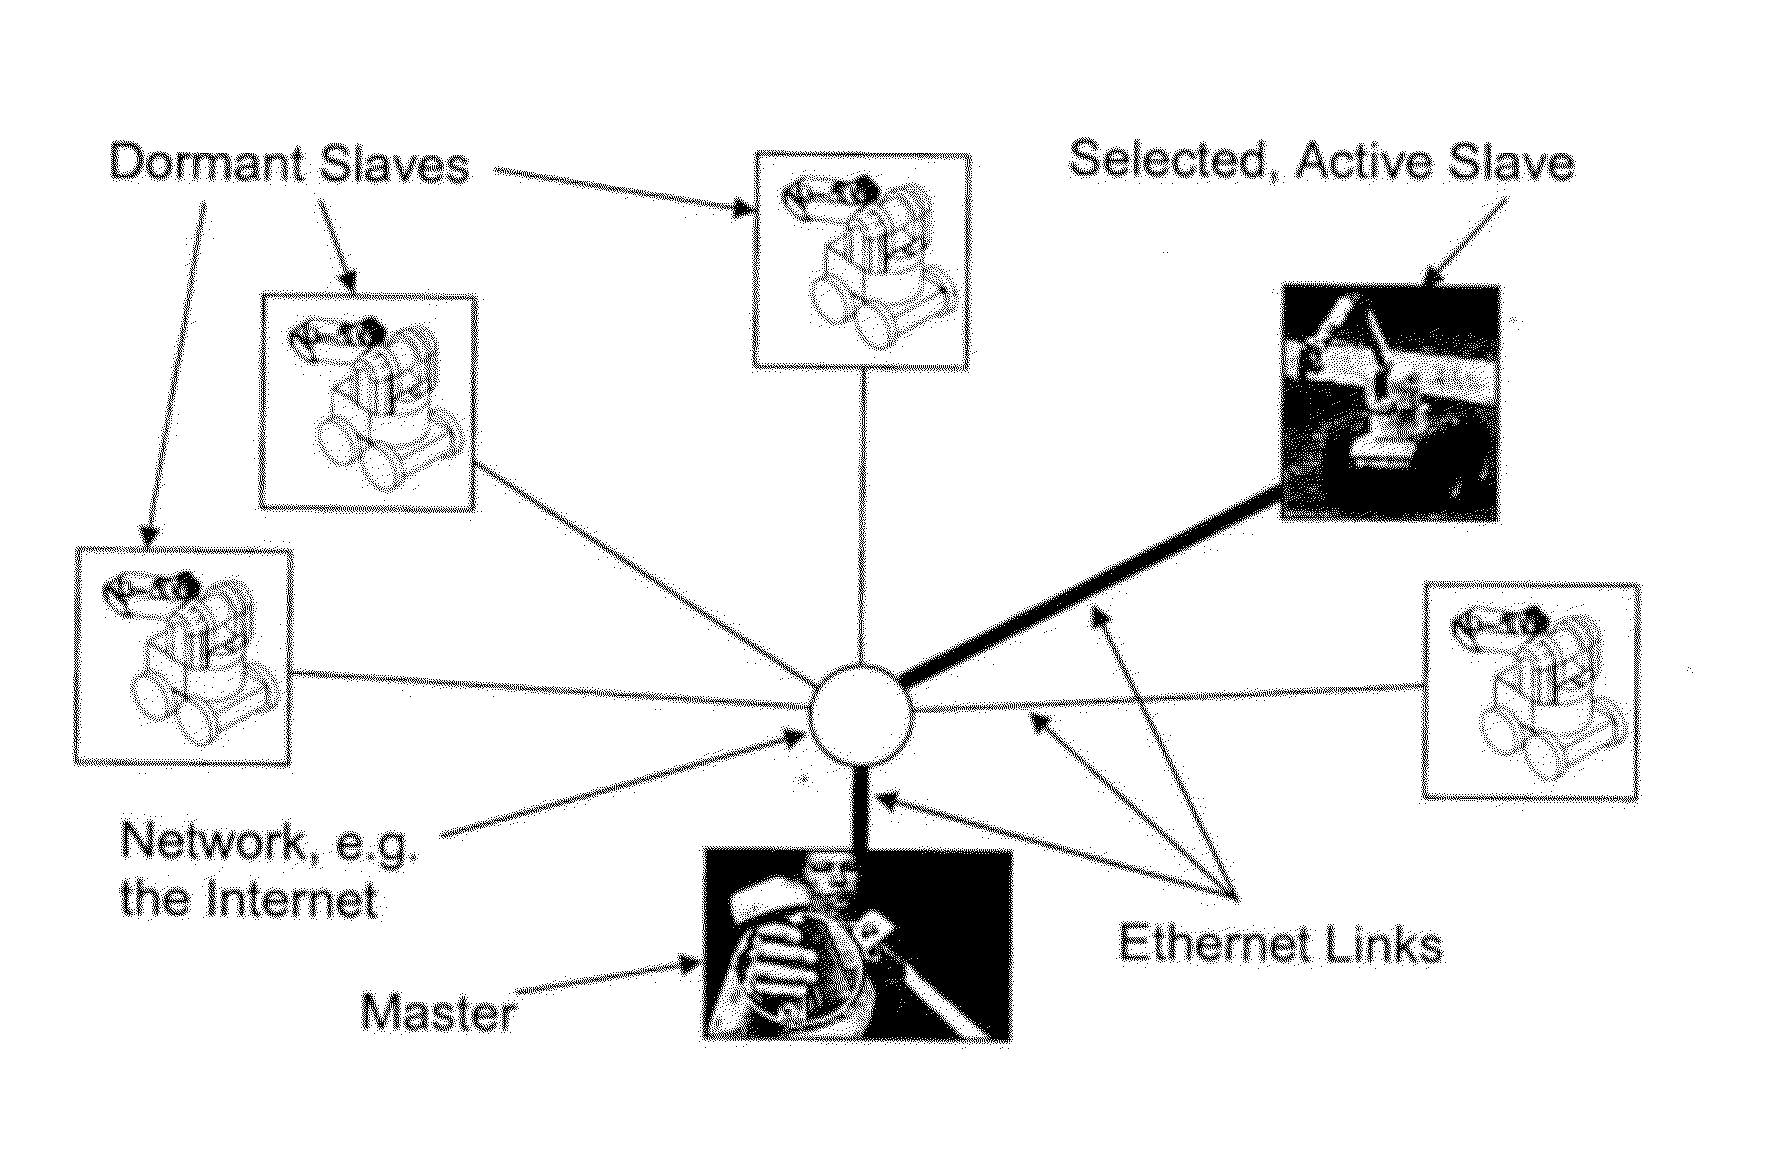 Teleoperator system with master controller device and multiple remote slave devices